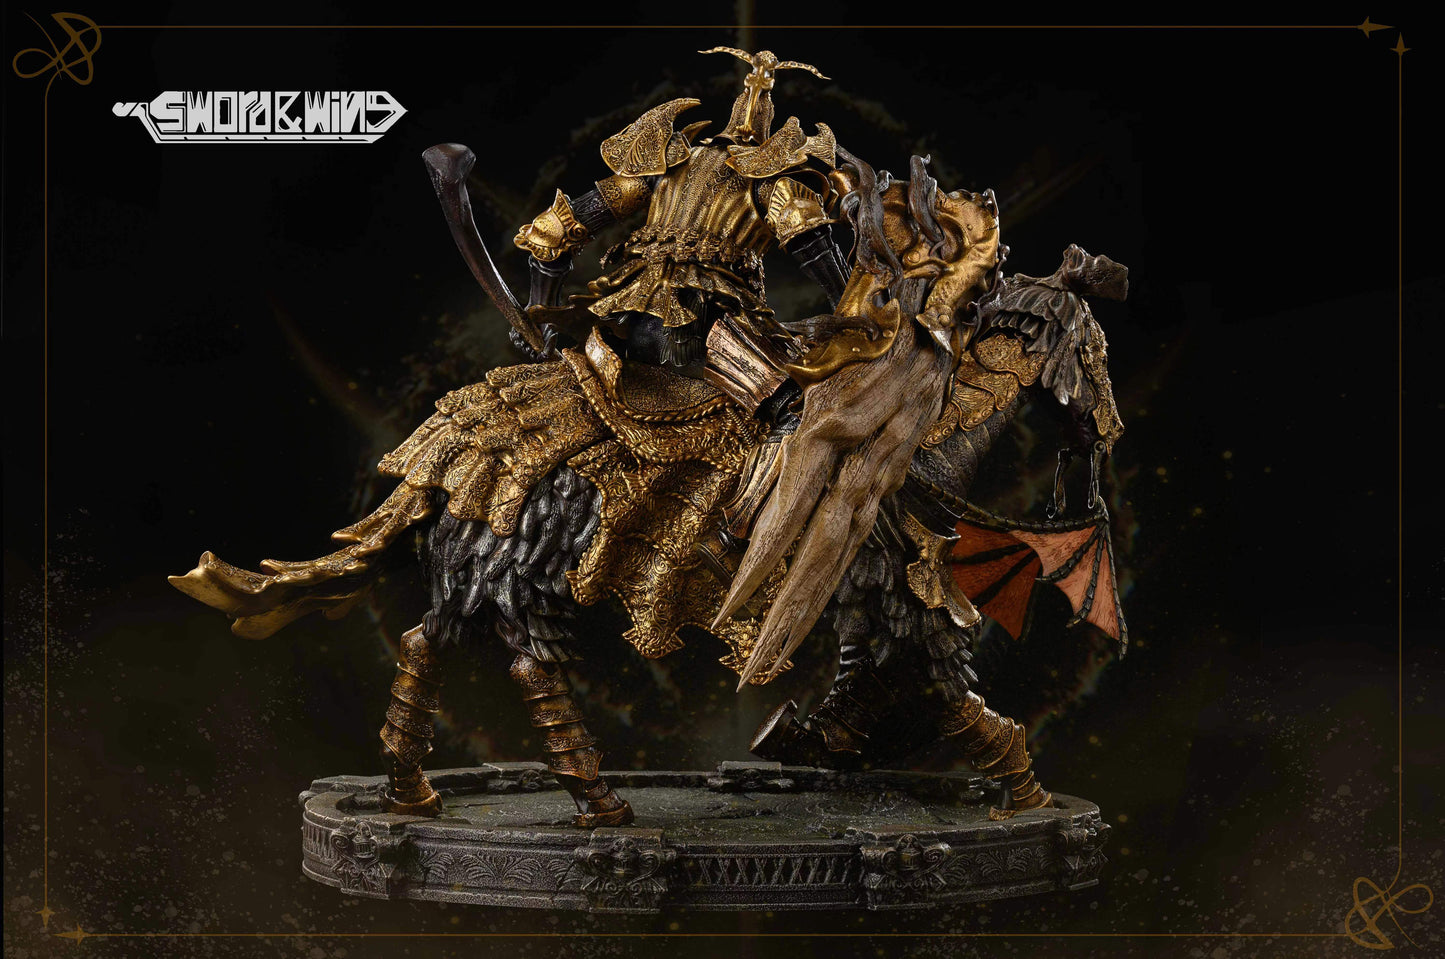 SWORD & WING STUDIO – ELDEN RING: DRACONIC TREE SENTINEL AND THE TARNISHED [SOLD OUT]